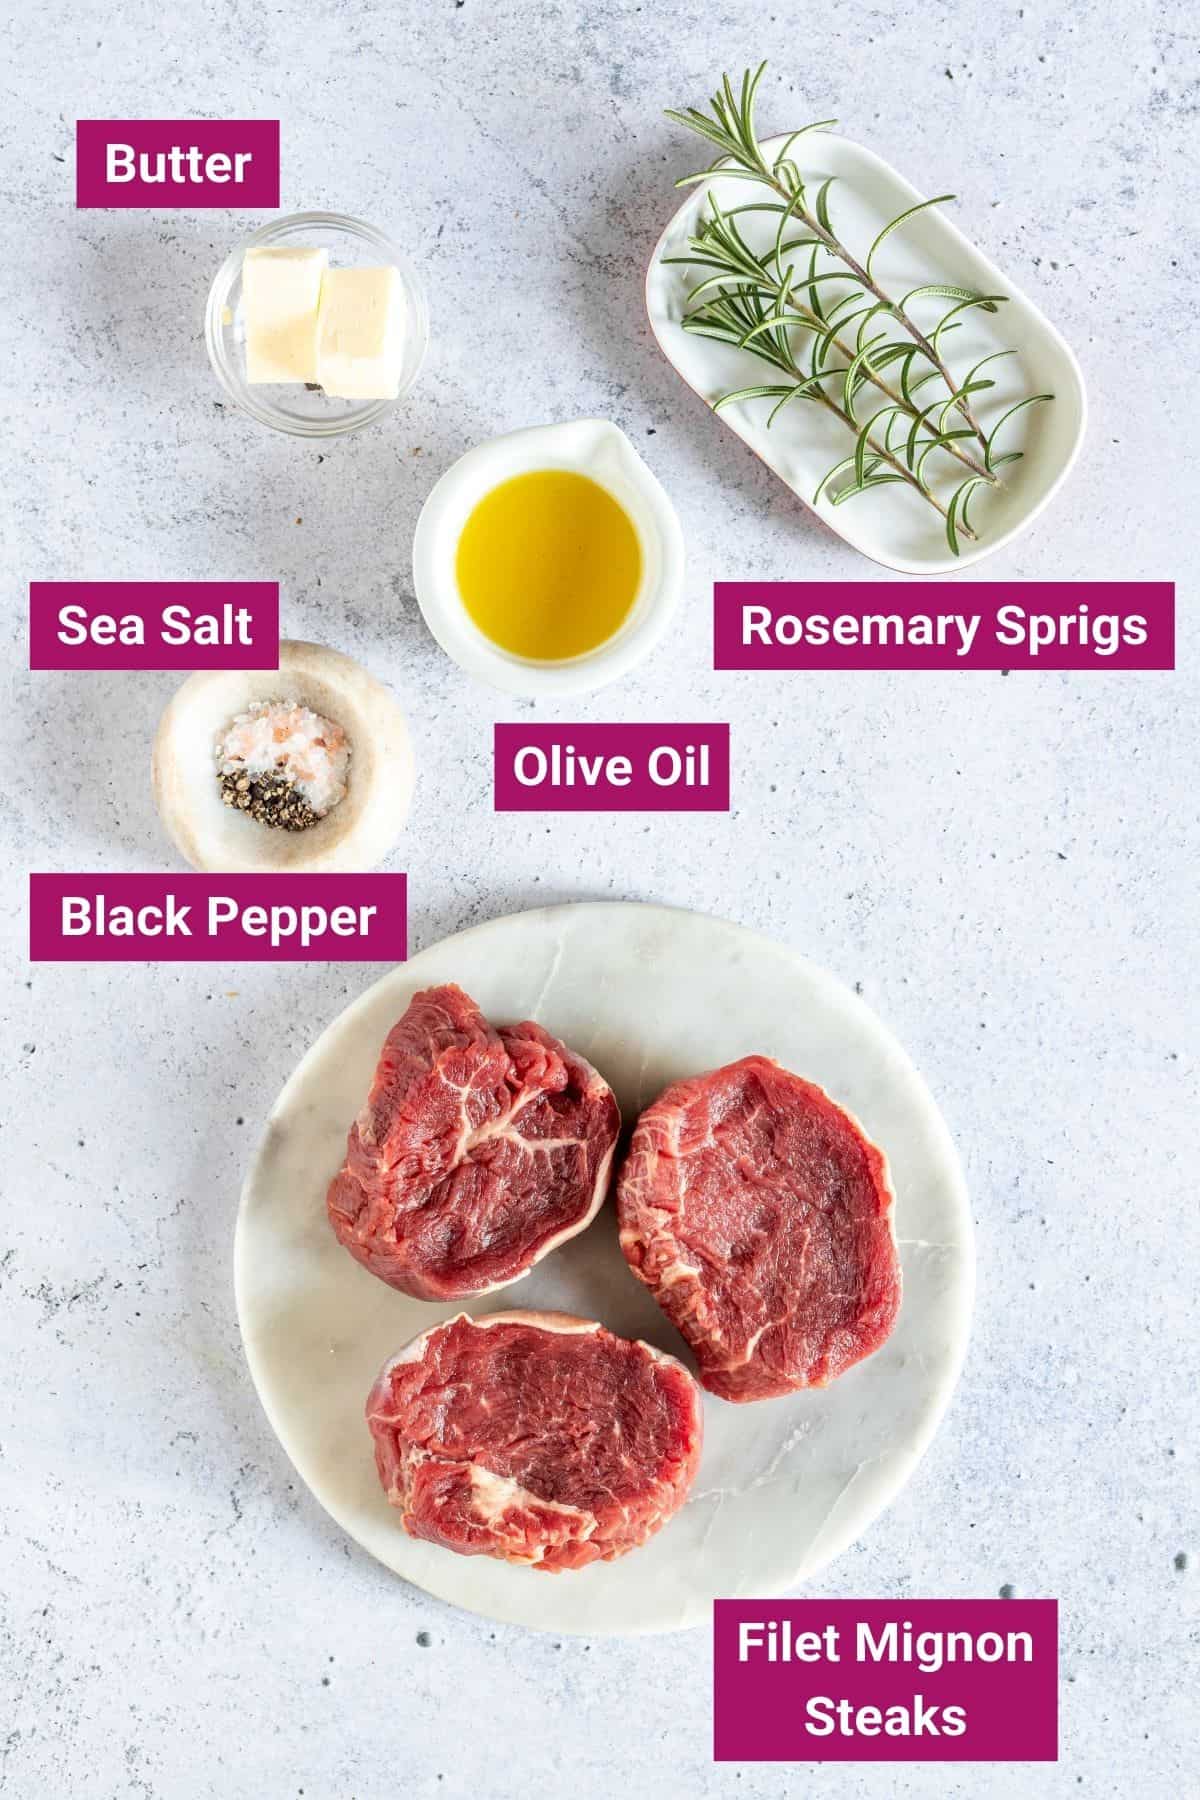 butter, rosemary, sea salt, black pepper, olive oil and mignon steaks on separate plates and bowls